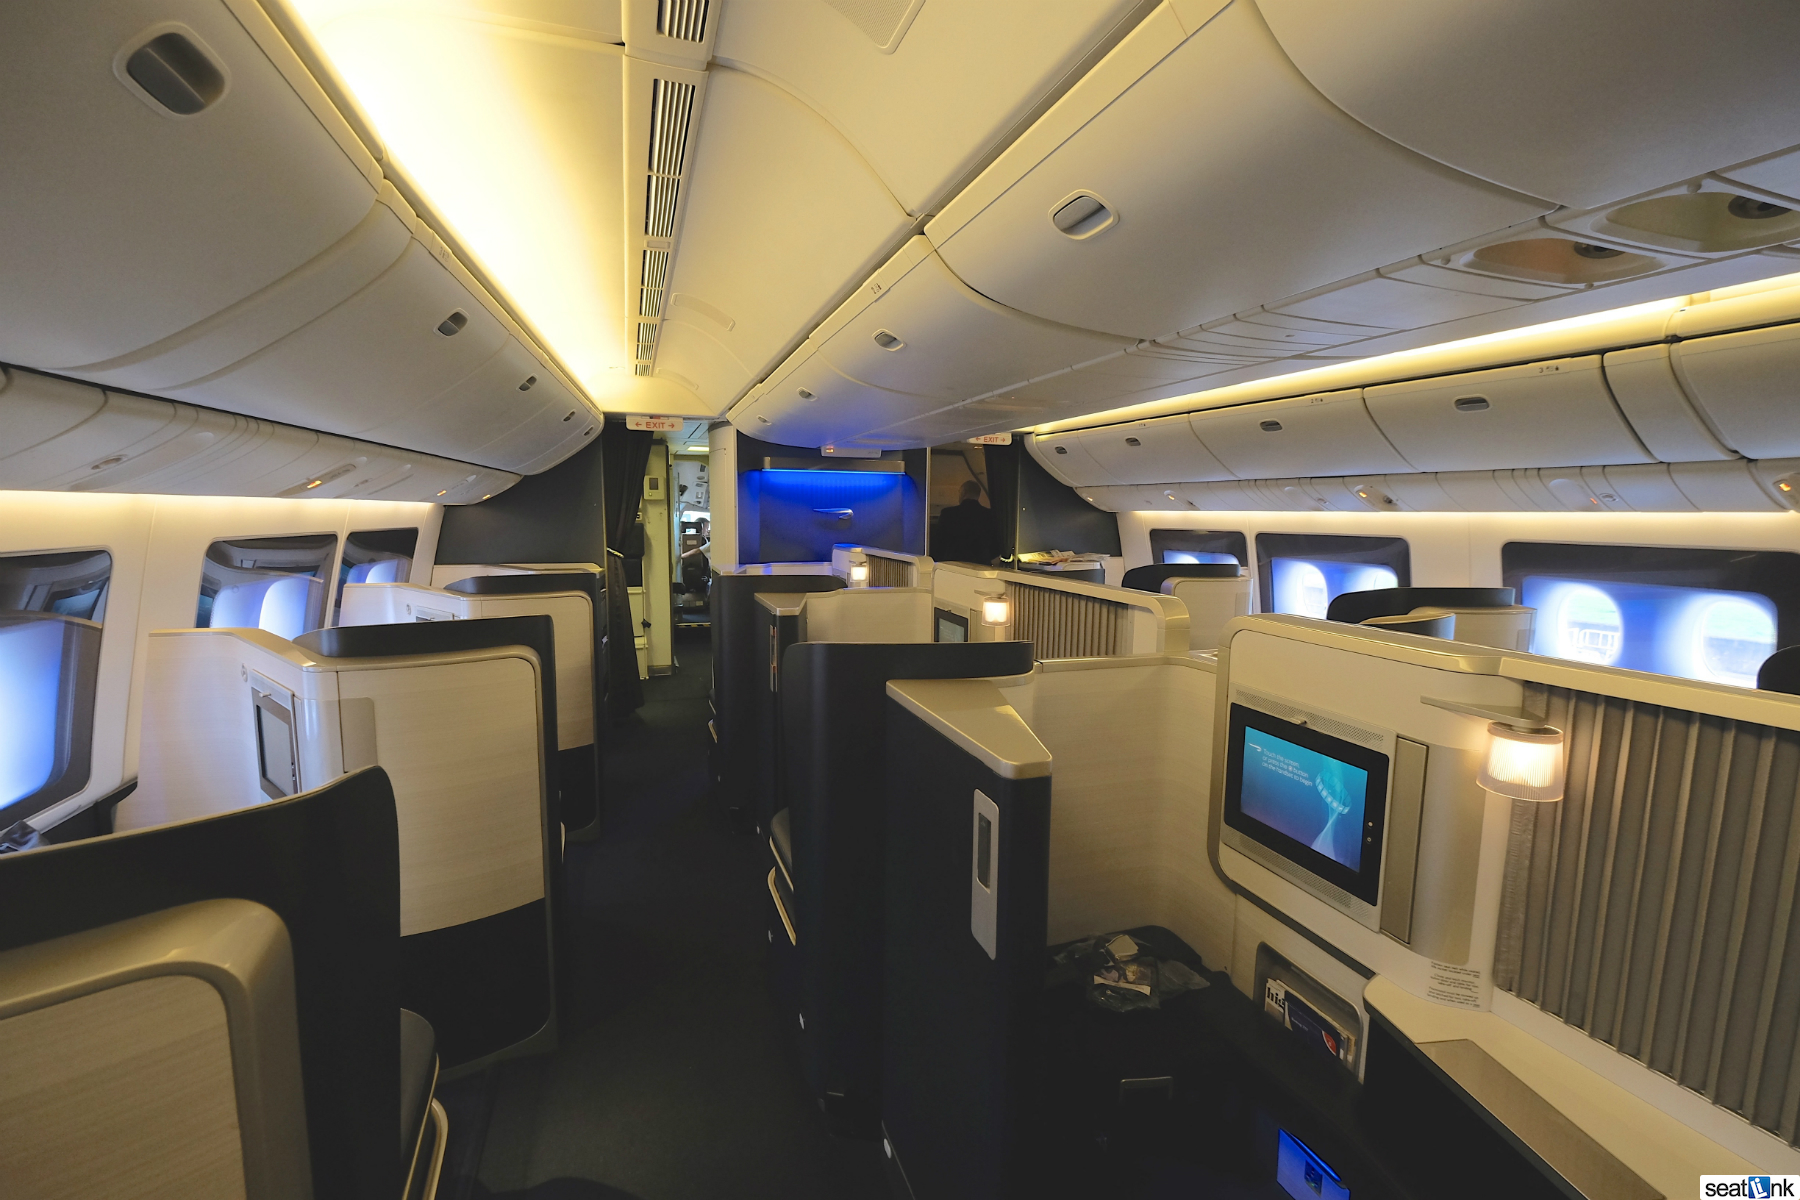 British Airways 777 First Class LHR to SEA [Review] - The Seatlink Blog